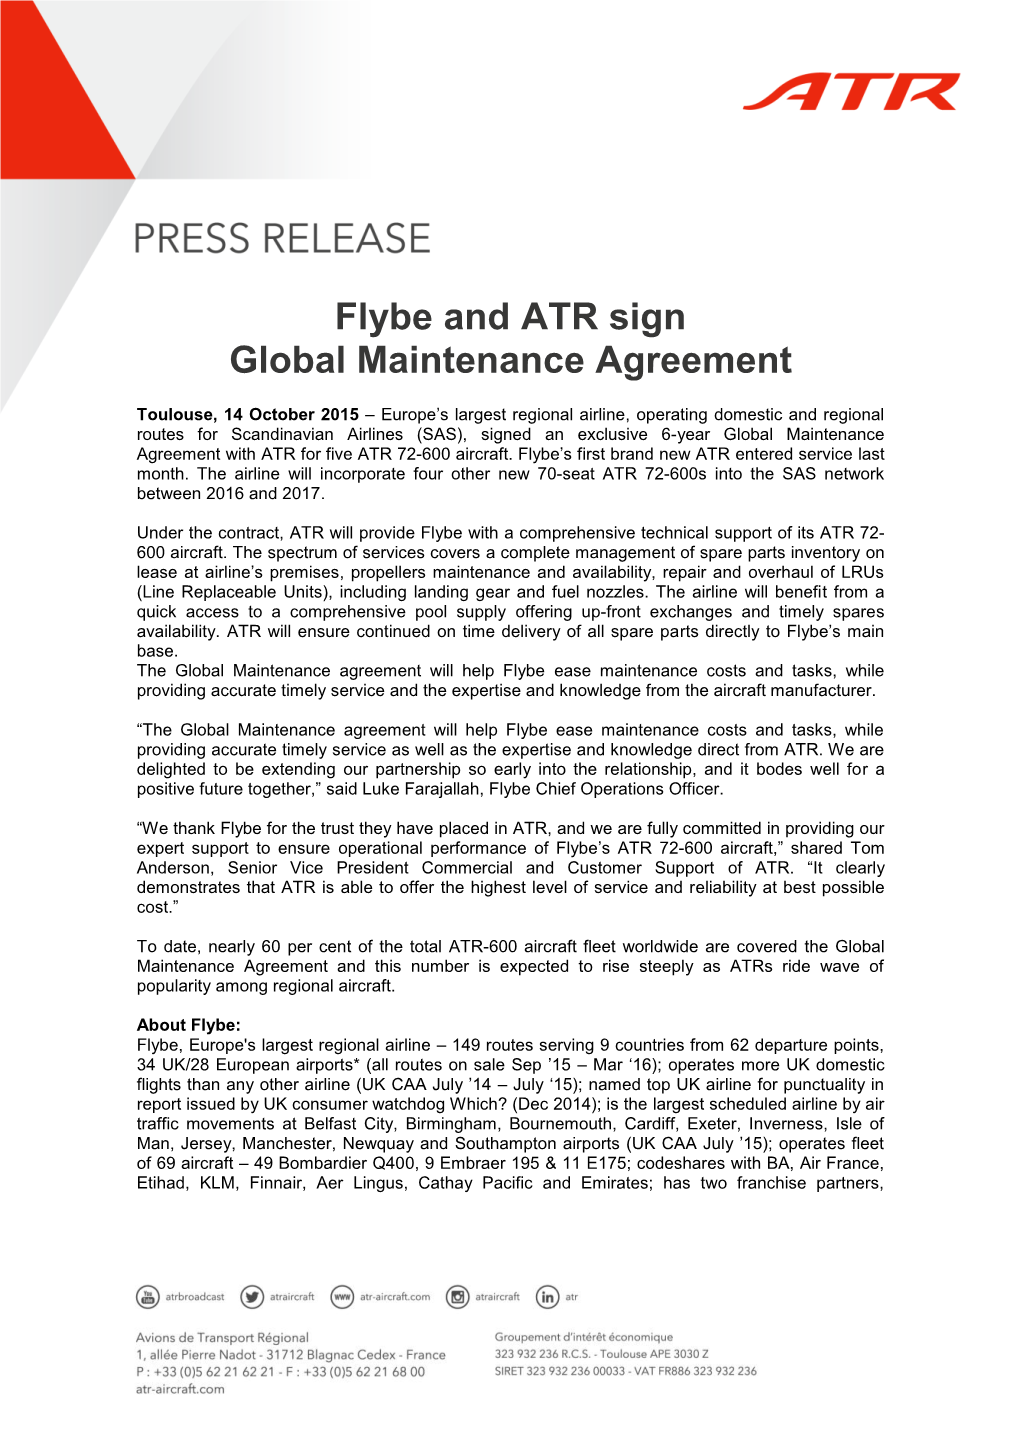 Flybe and ATR Sign Global Maintenance Agreement